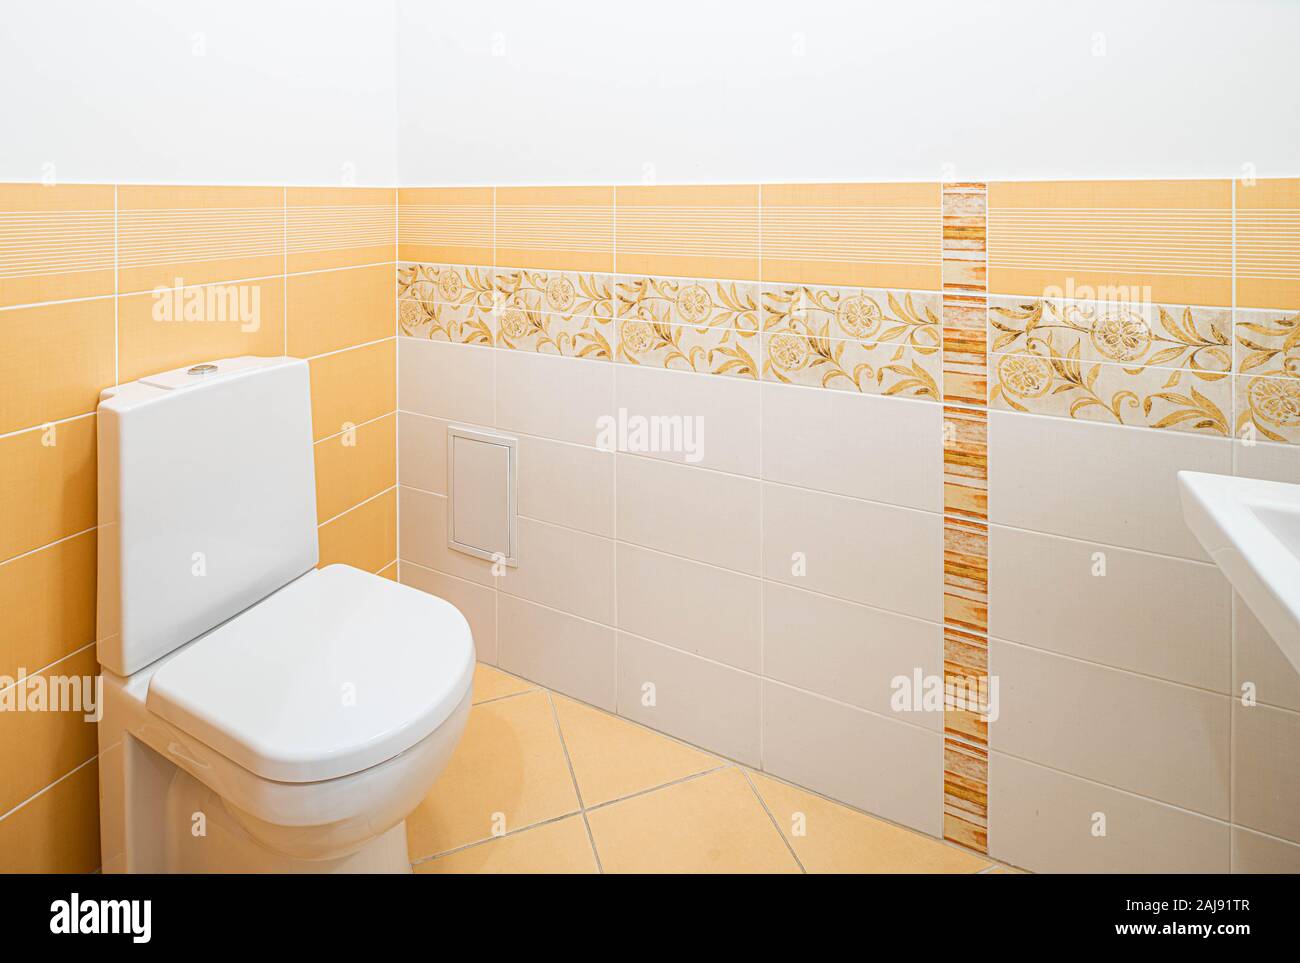 White toilet in bathroom. Light peach tile on the wall and floor. Stock Photo